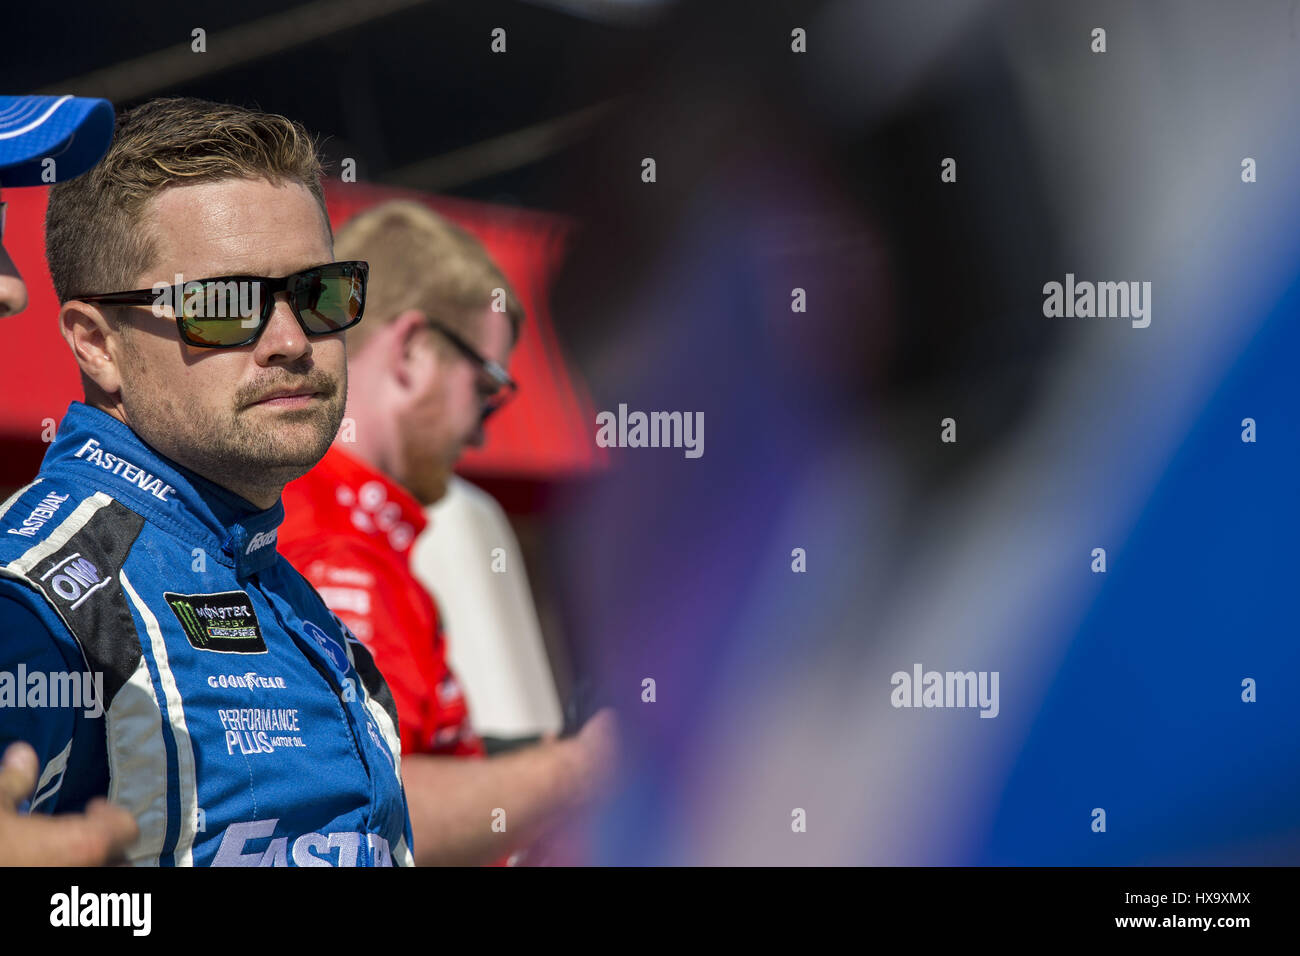 Fontana, California, USA. 24th Mar, 2017. March 24, 2017 - Fontana, California, USA: Ricky Stenhouse Jr. (17) hangs out on pit road prior to qualifying for the Auto Club 400 at Auto Club Speedway in Fontana, California. Credit: Jusitn R. Noe Asp Inc/ASP/ZUMA Wire/Alamy Live News Stock Photo